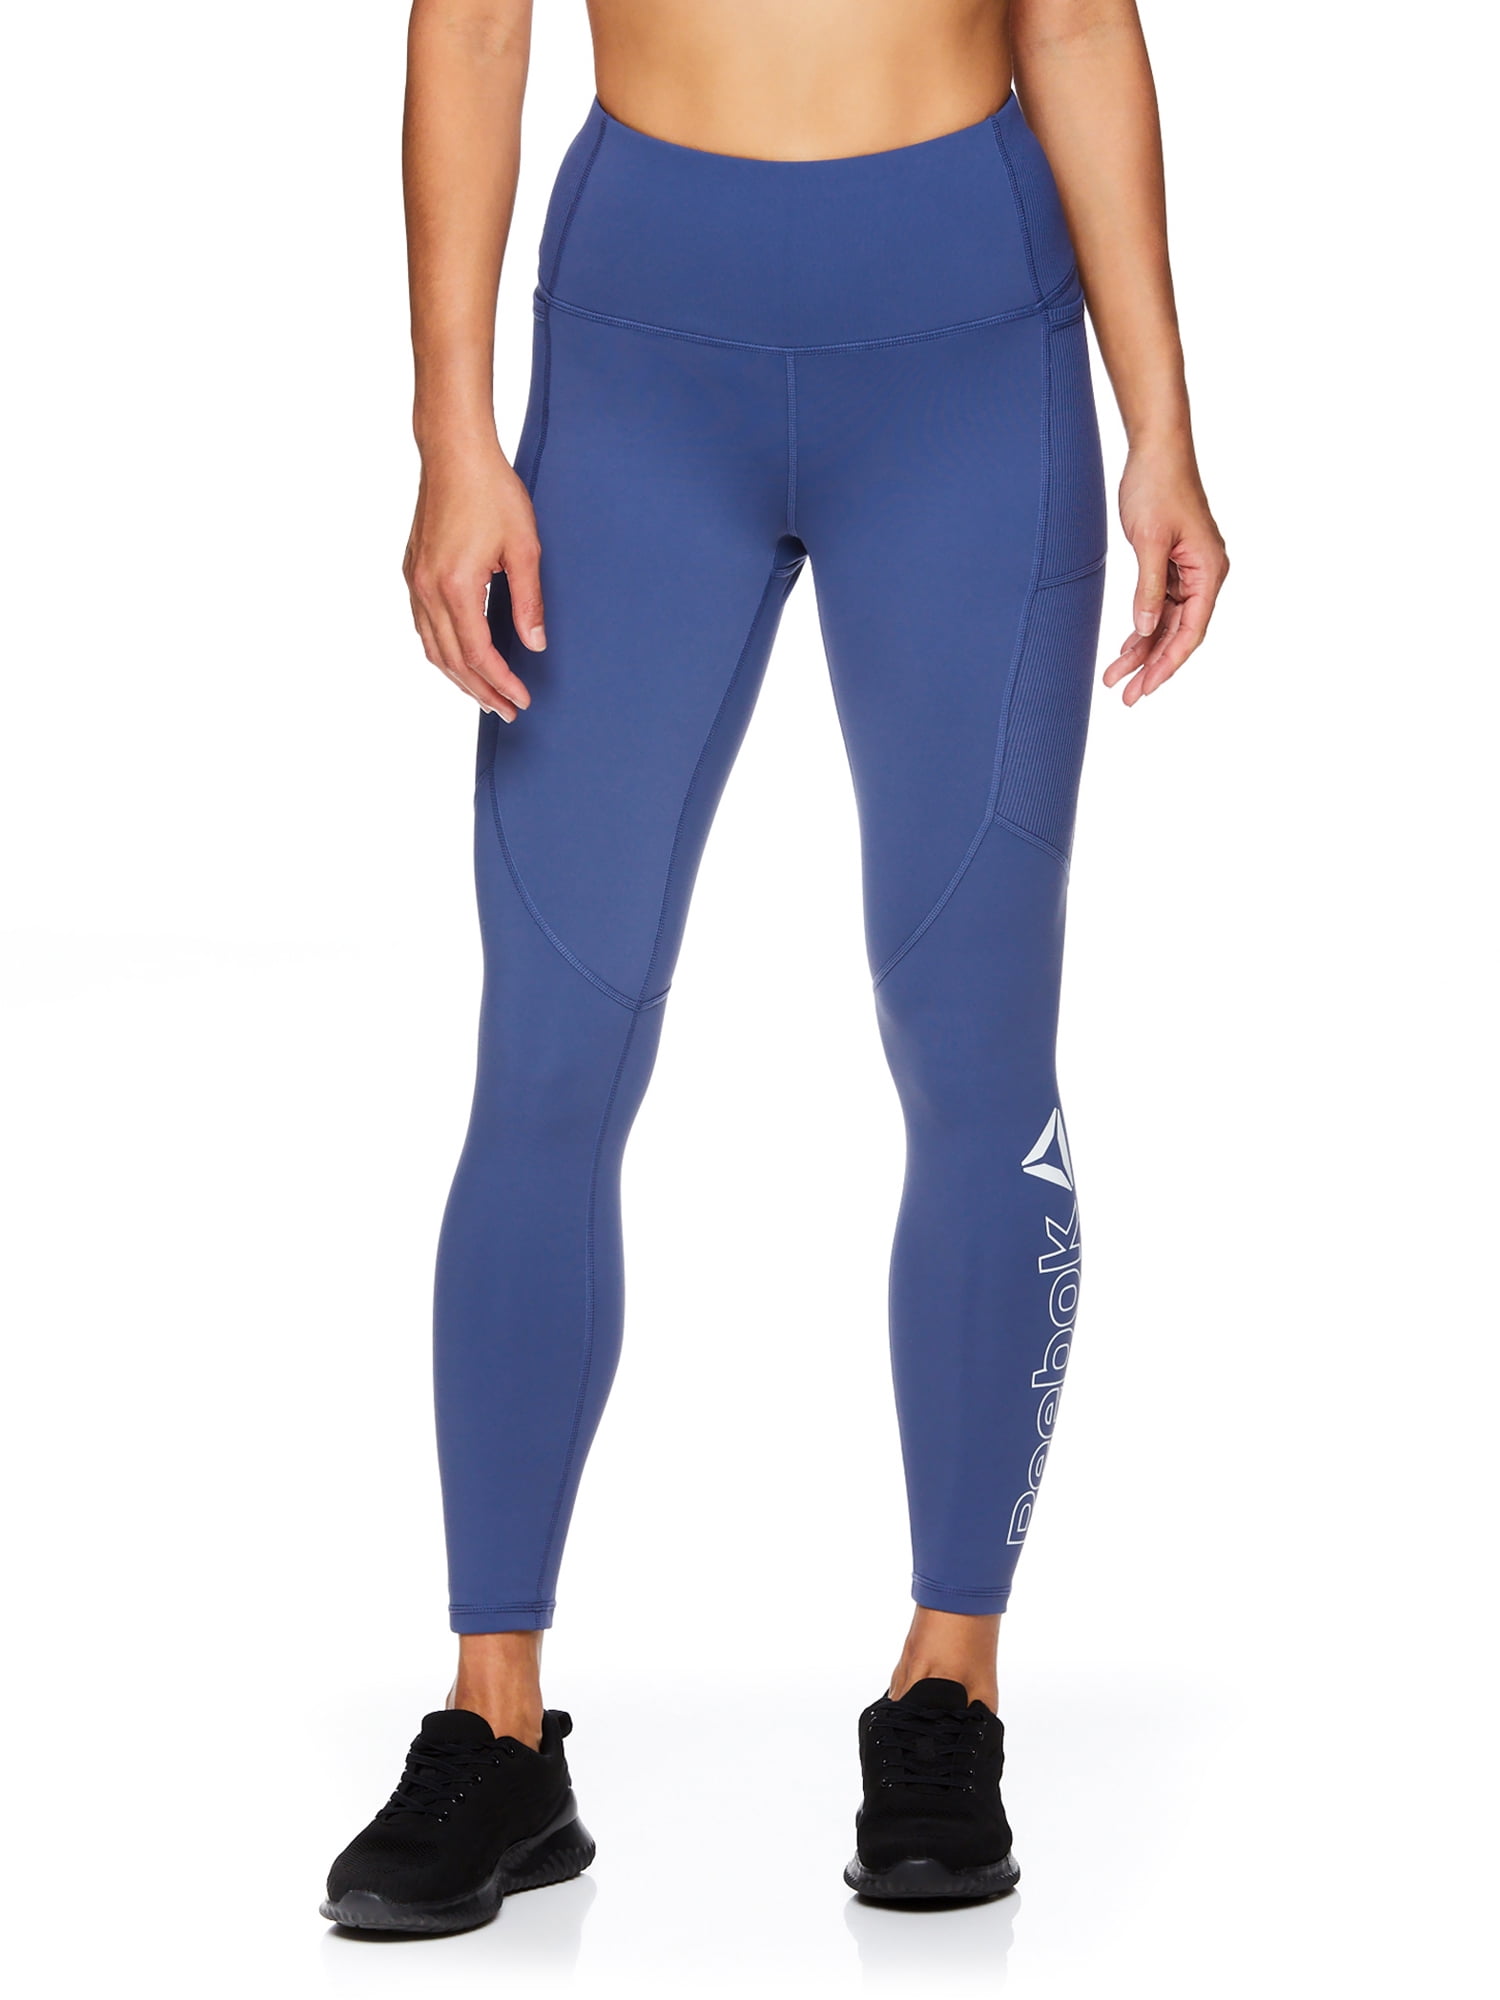 LUX Lyra Ankle Length Perfect Fitting Leggings – Online Shopping site in  India